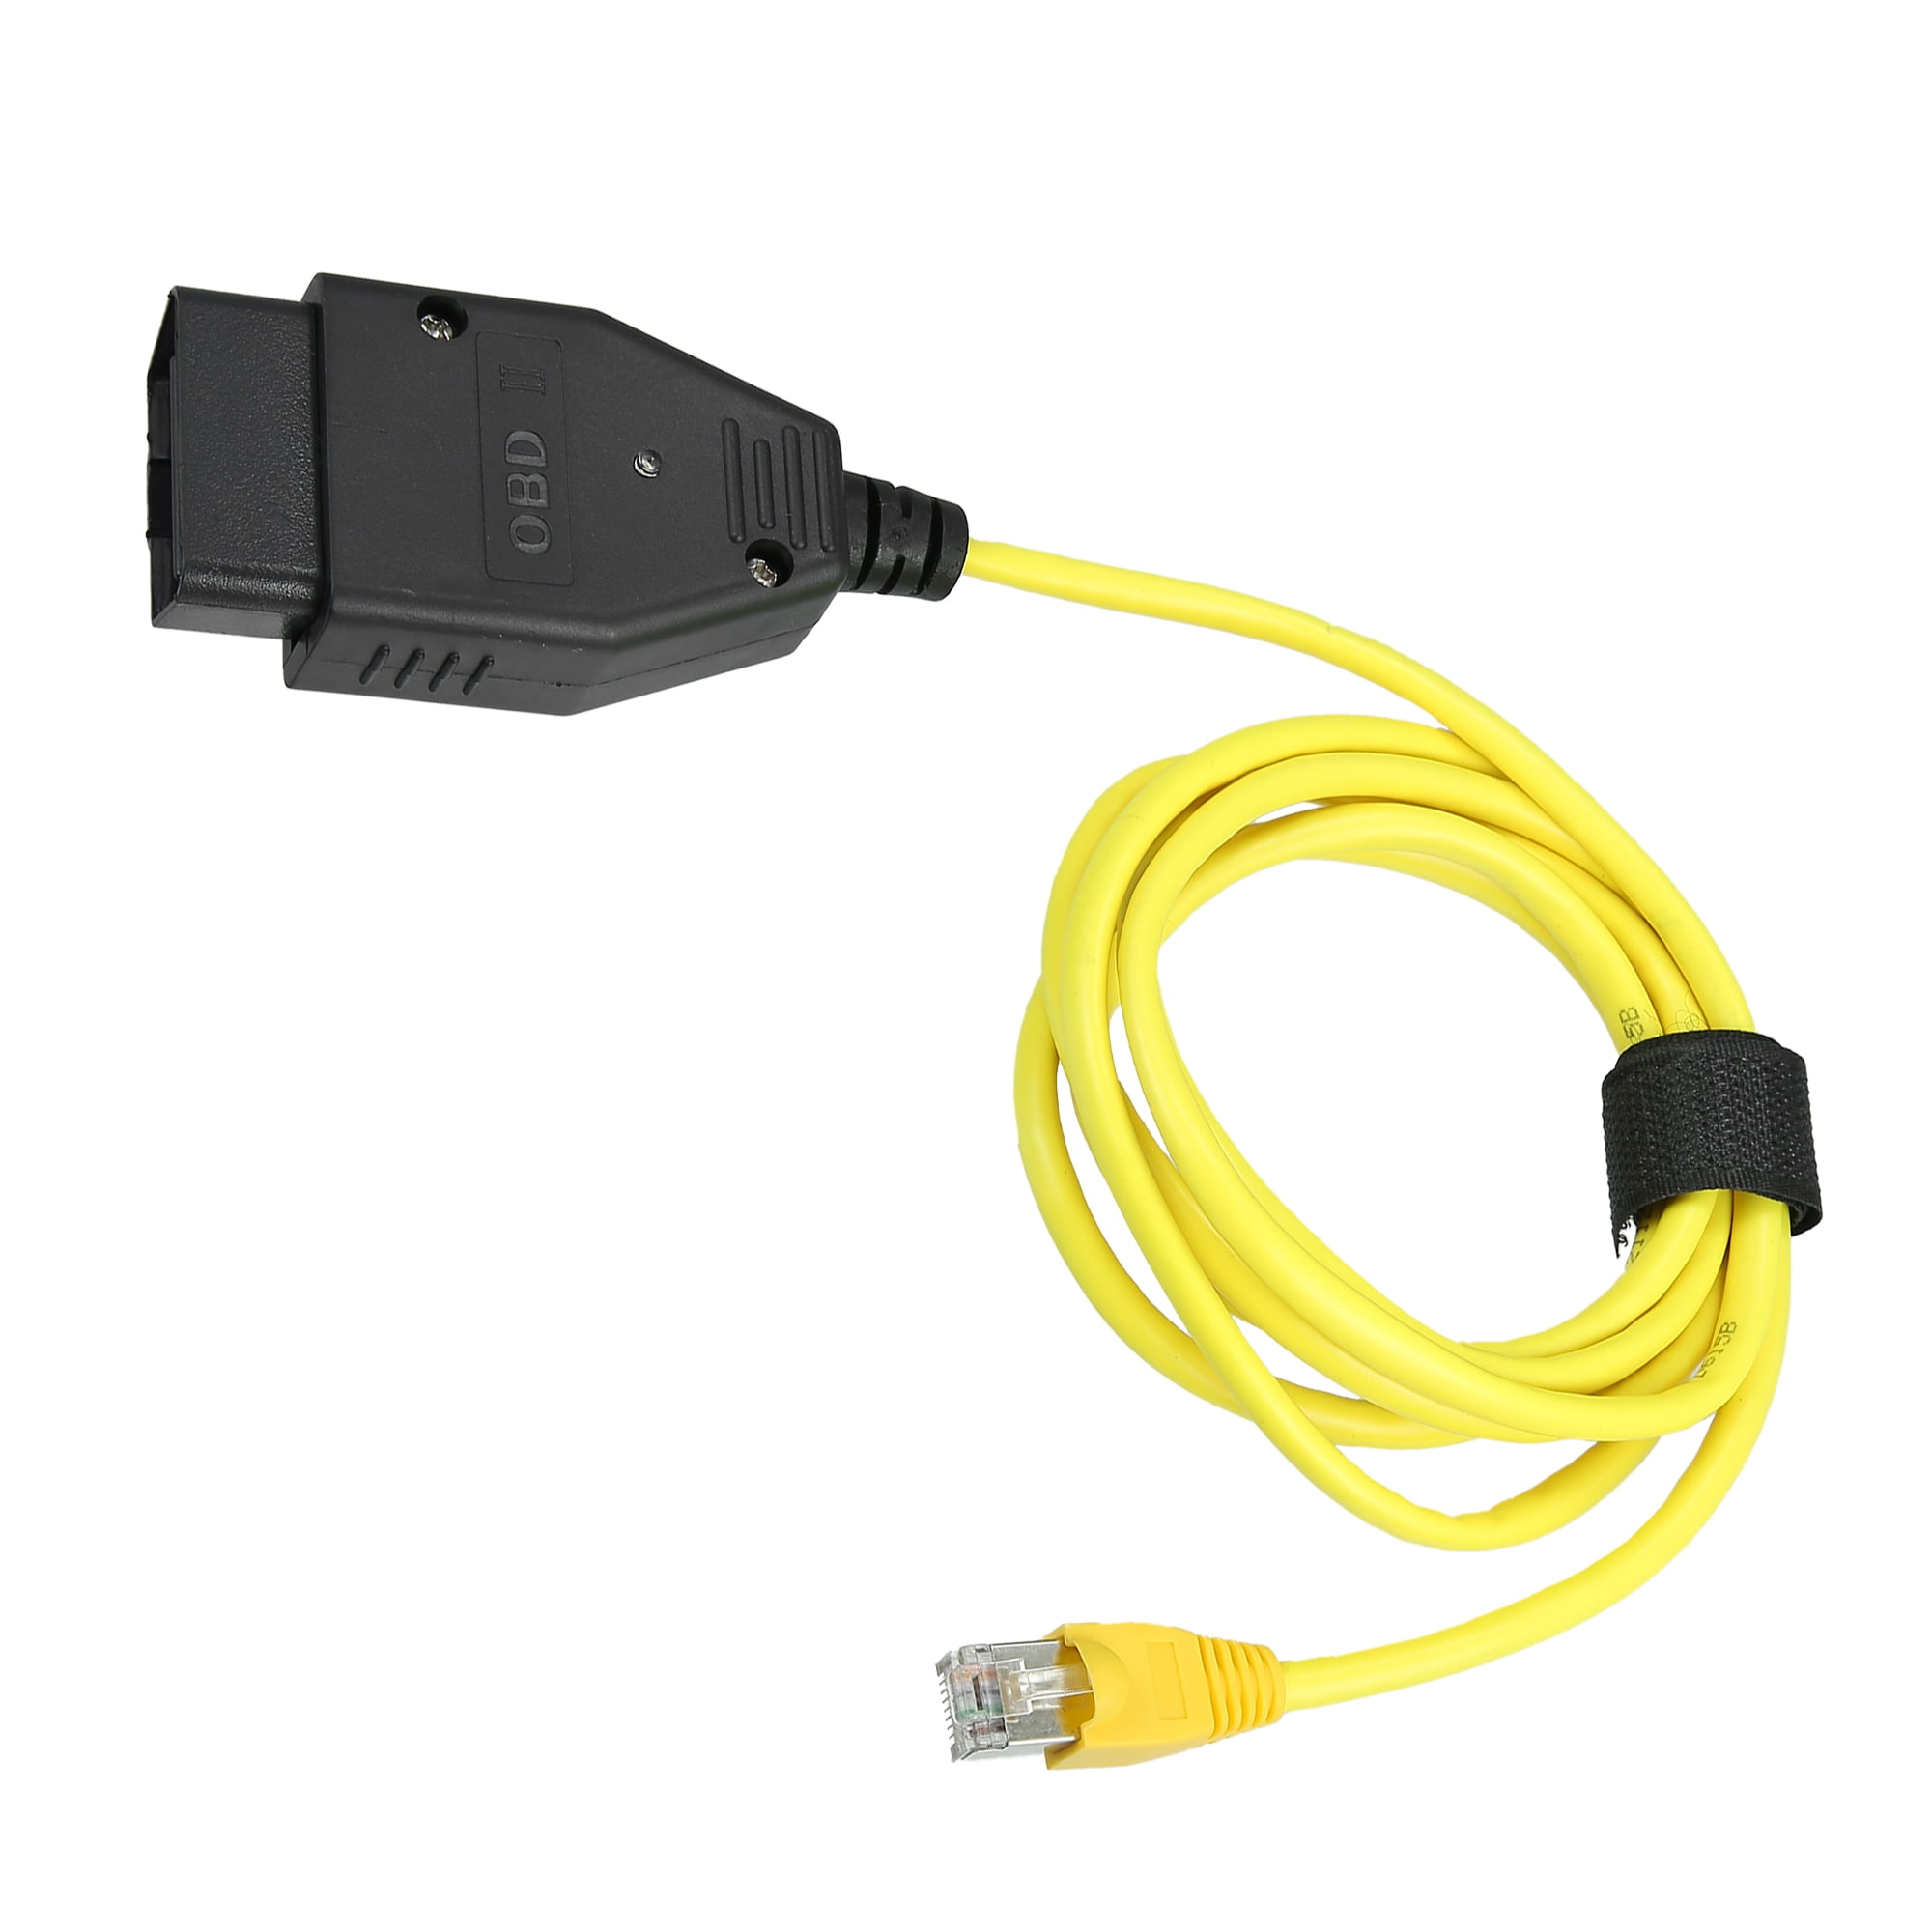  ethernet enet to obd2 E-sys Cable Tools E-SYS rj45